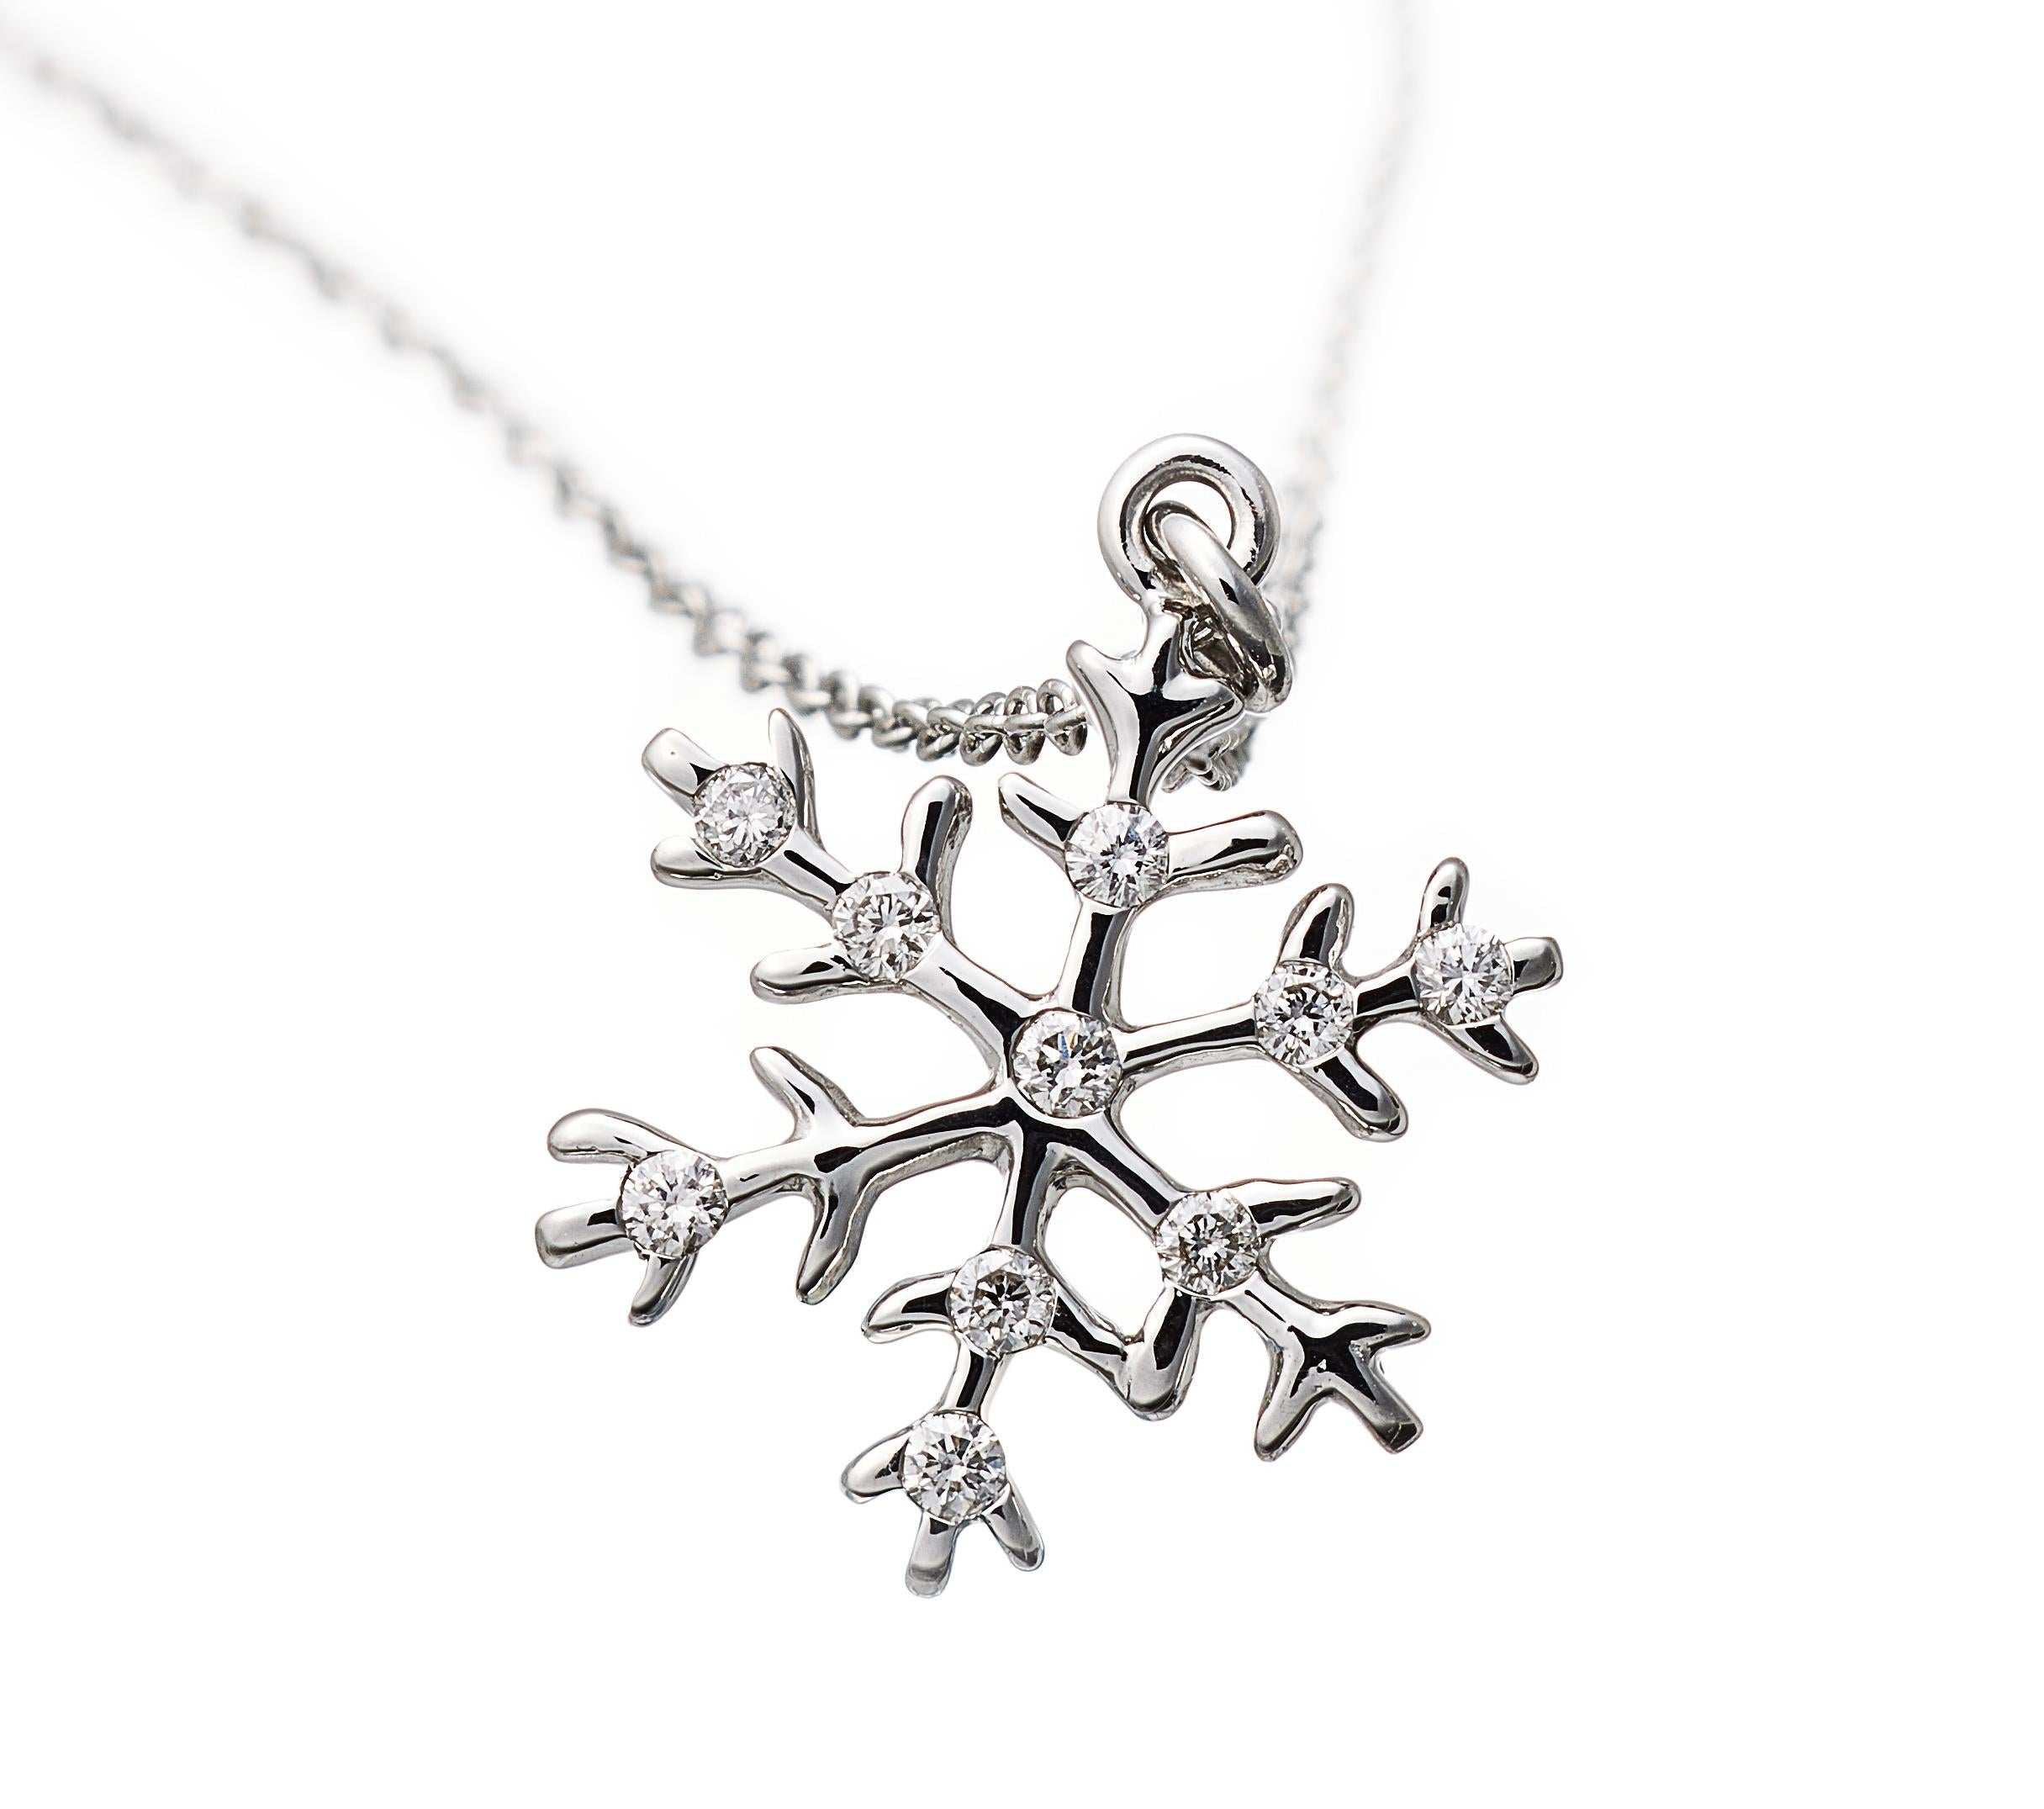 Paving: White Diamonds 0,07ct. (10 pieces) 
Material: White Gold 750
Neckalace Length 42 cm

The perfect small Christmas Present for your beloved ones is this Pendant 